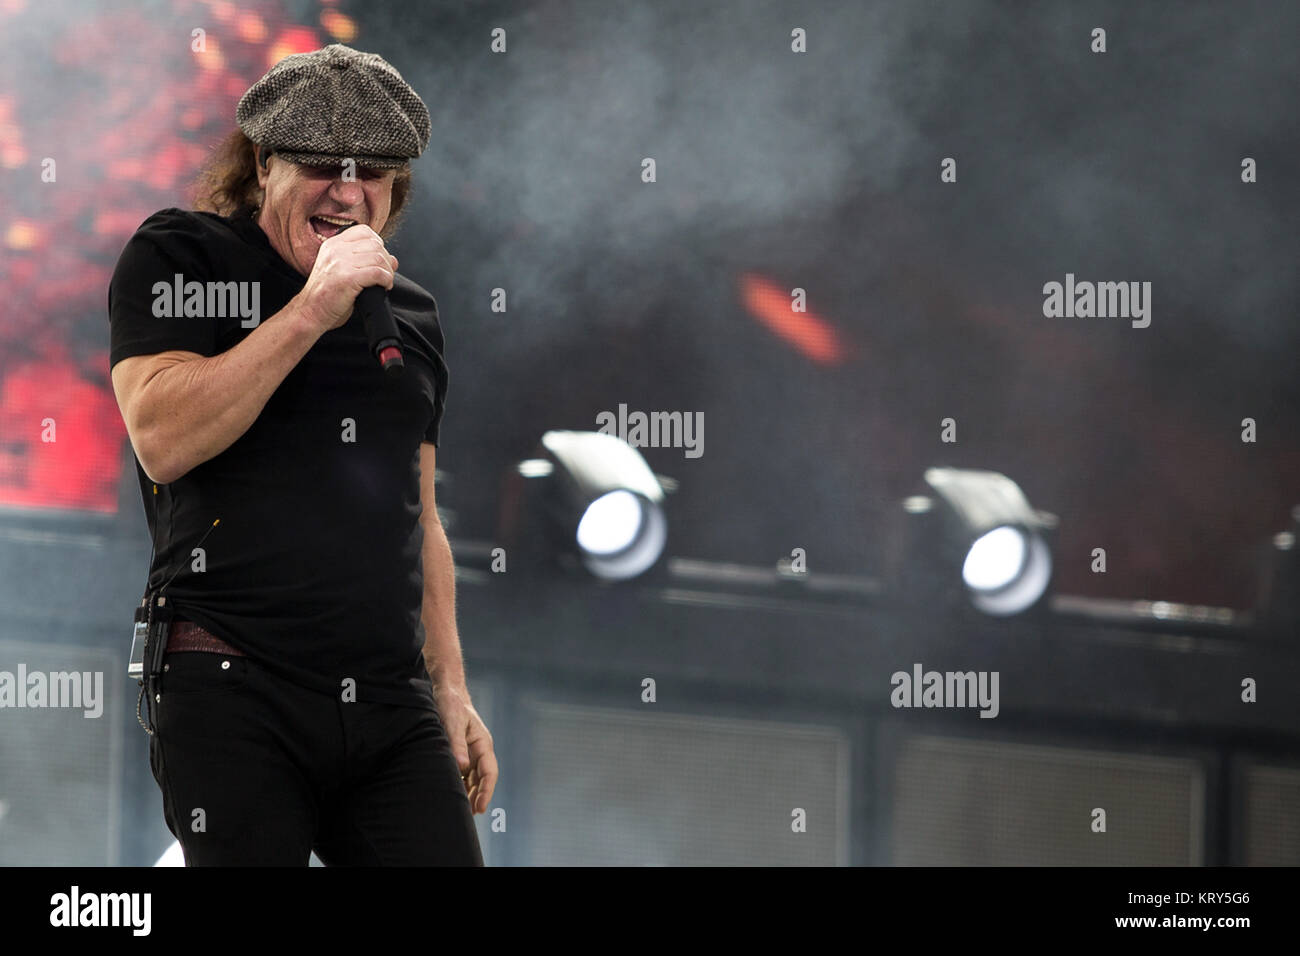 The Australian rock band AC/DC performs a live concert at Valle Hovin Stadion in Oslo as part of the Rock or Bust World 2015 Tour. Here vocalist Brian Johnson seen live on stage. Norway, 17/07 2015. Stock Photo